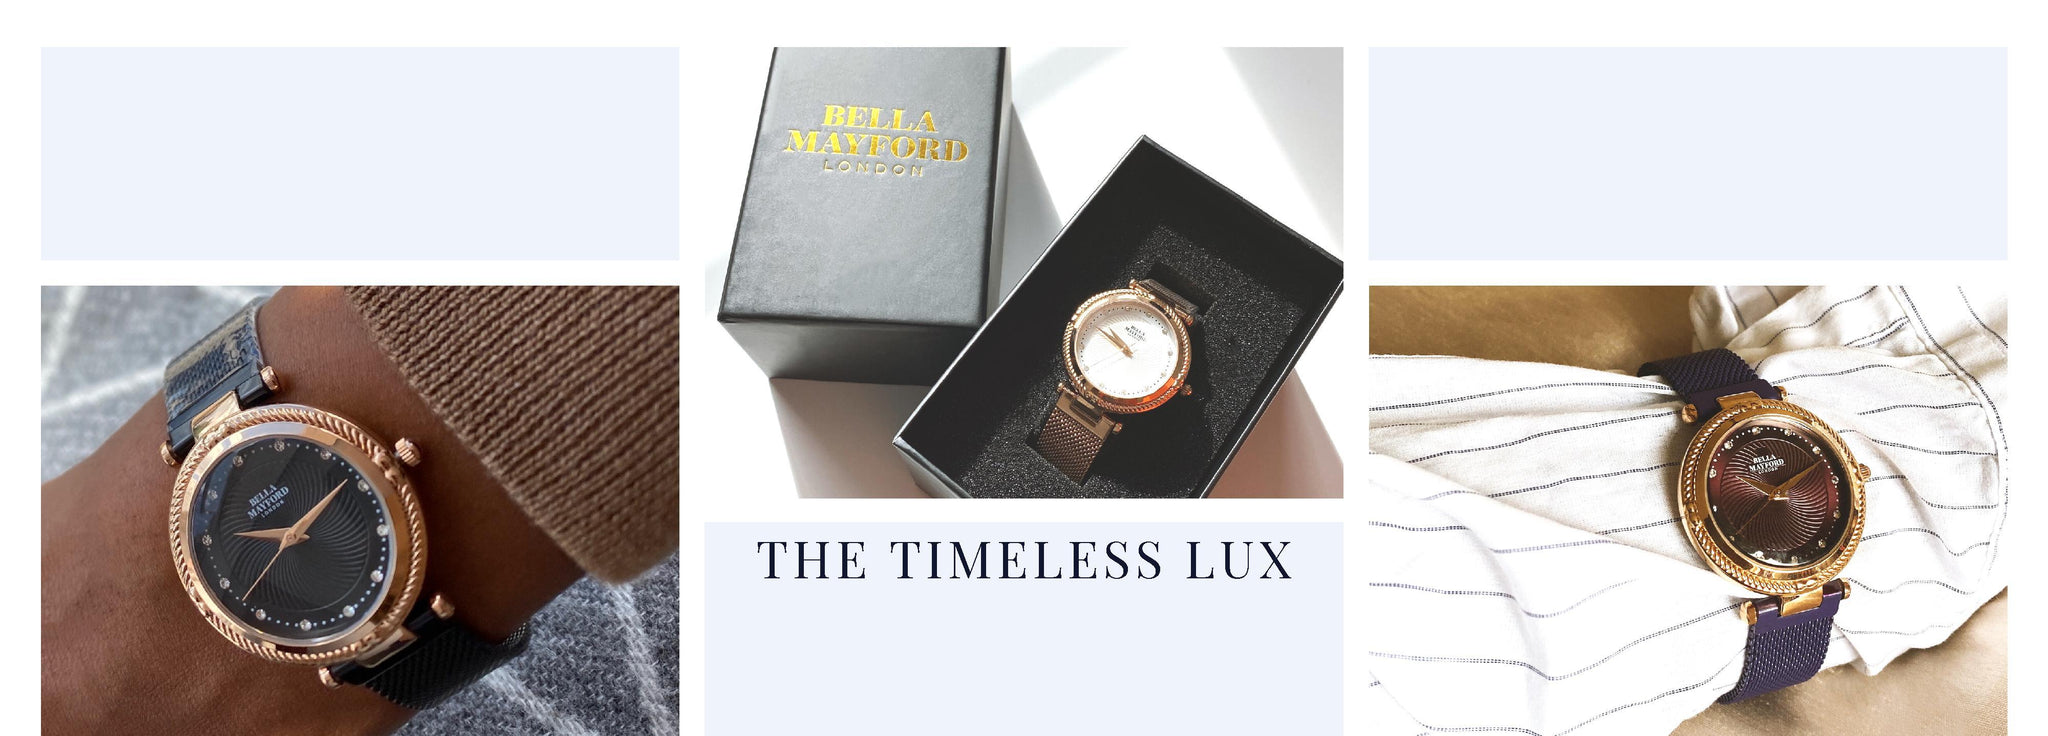 The Timeless Lux Watch by Bella Mayford